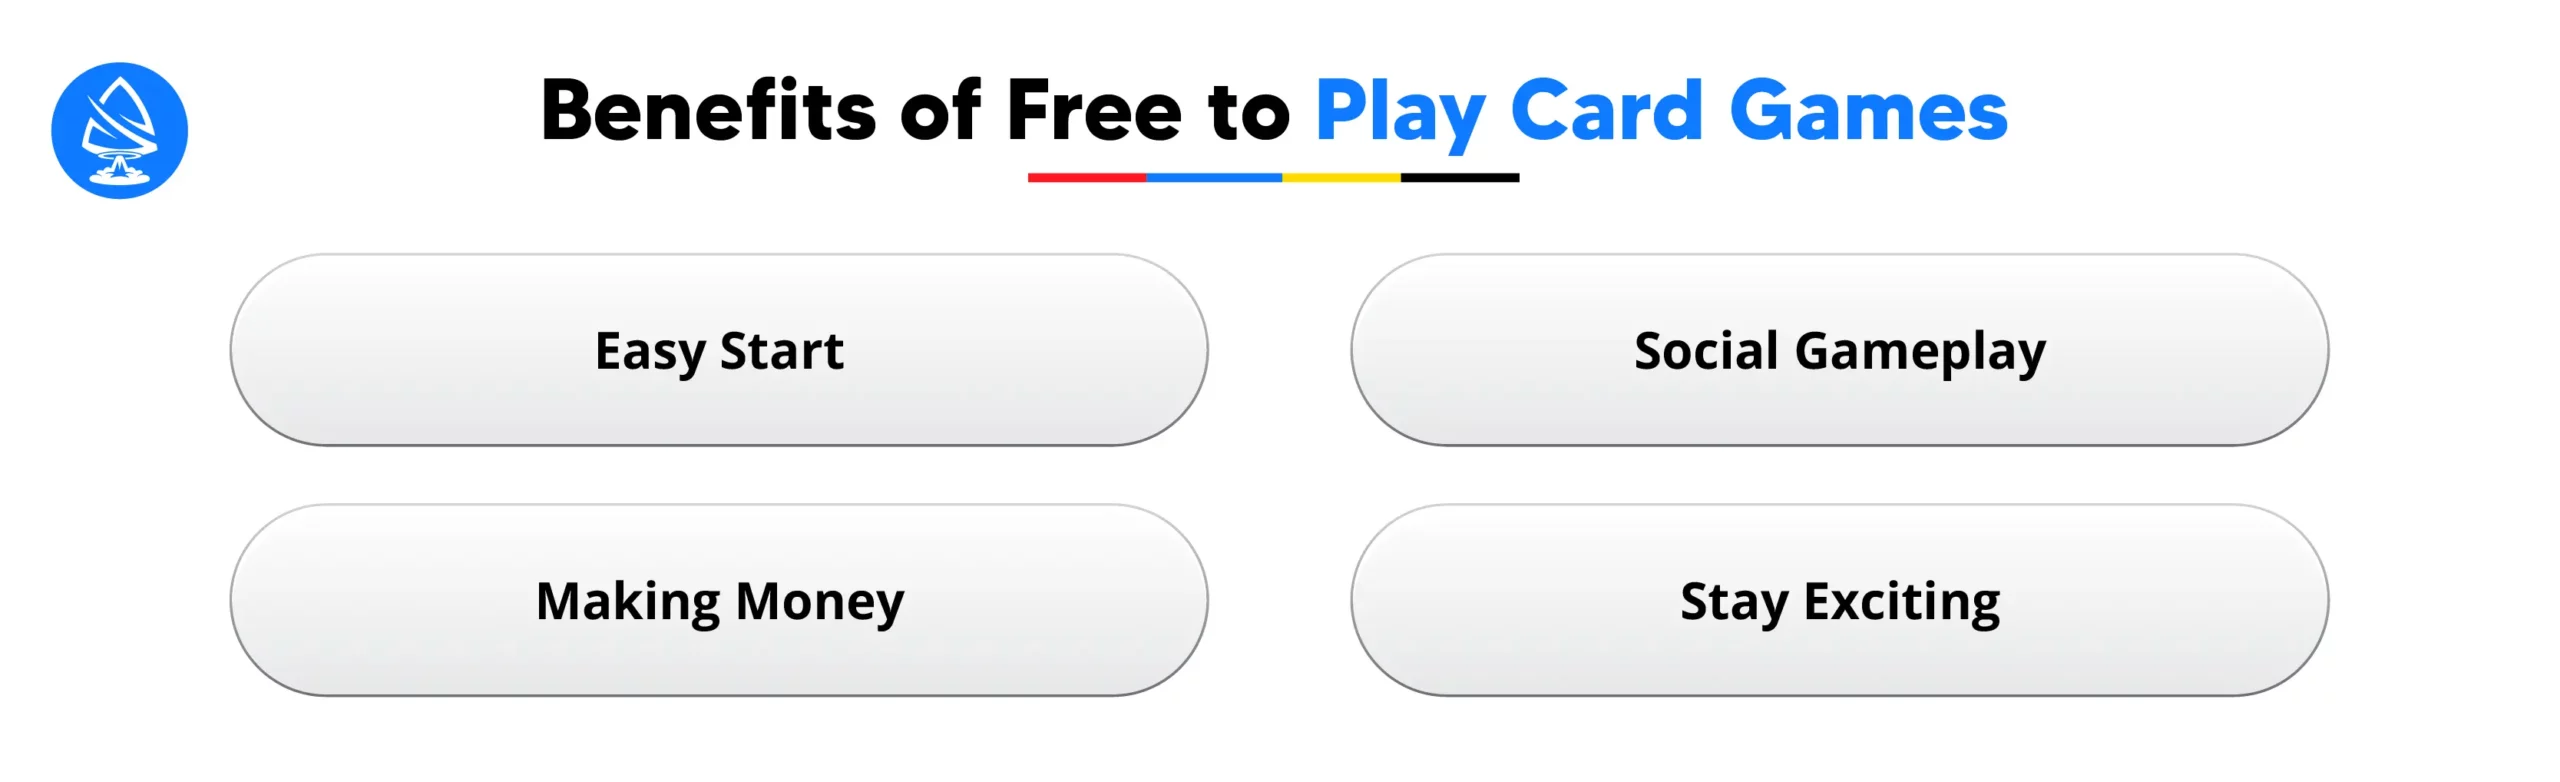 Benefits of Free to Play Card Games